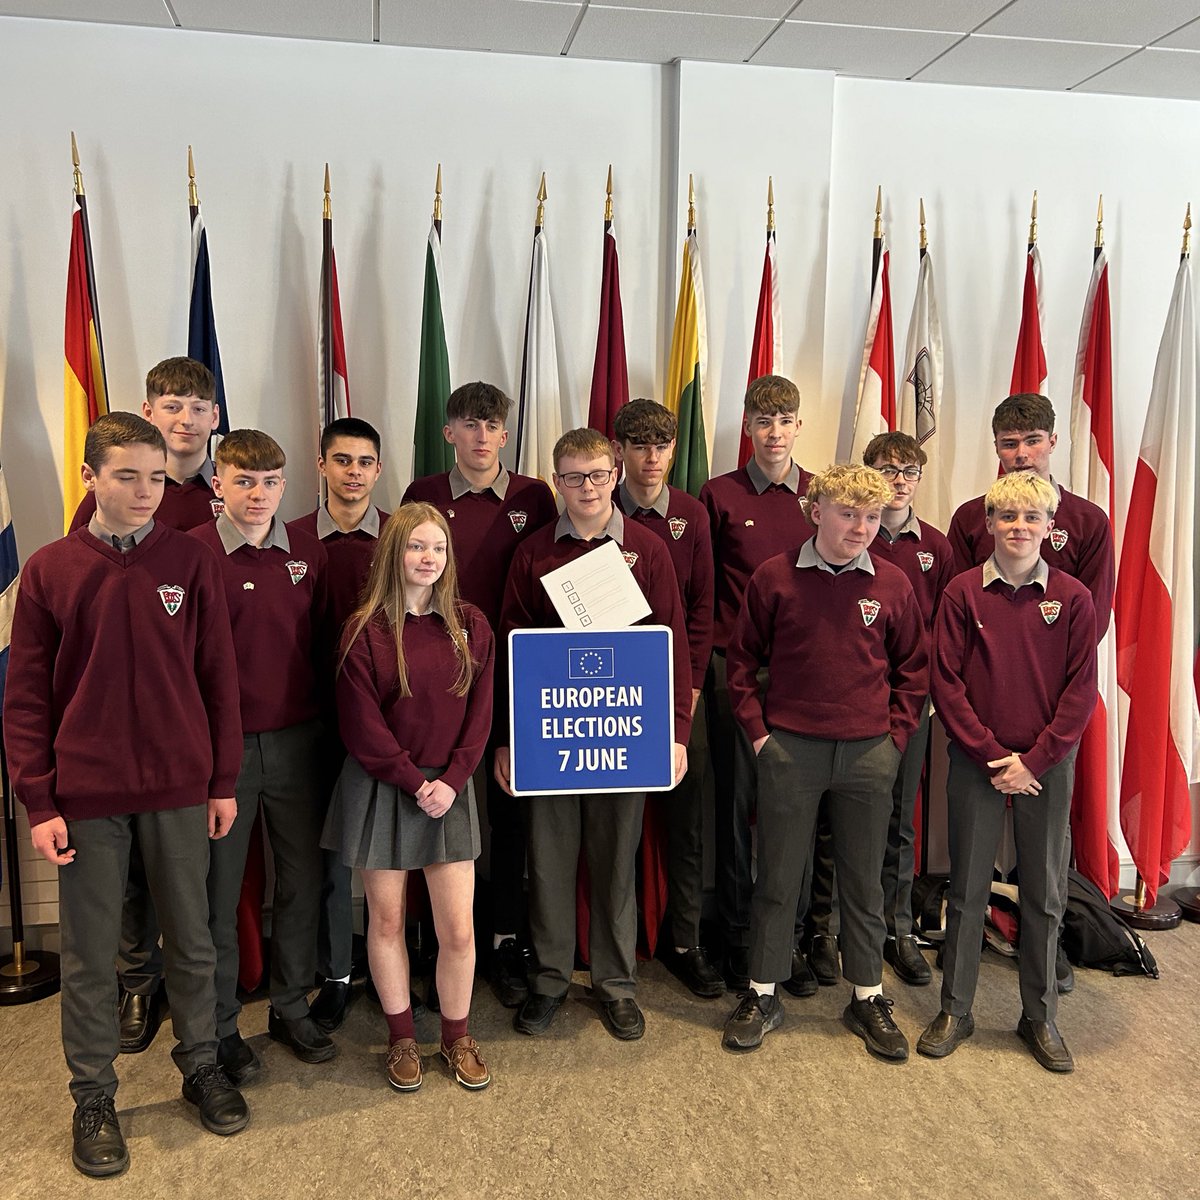 This morning we welcomed students from #ambassadorschools @EtssLimerick @PdlsB @MCCCPM at Europe House, where they learned all about the EU and the work of the European Parliament! 🇪🇺 #Epasireland